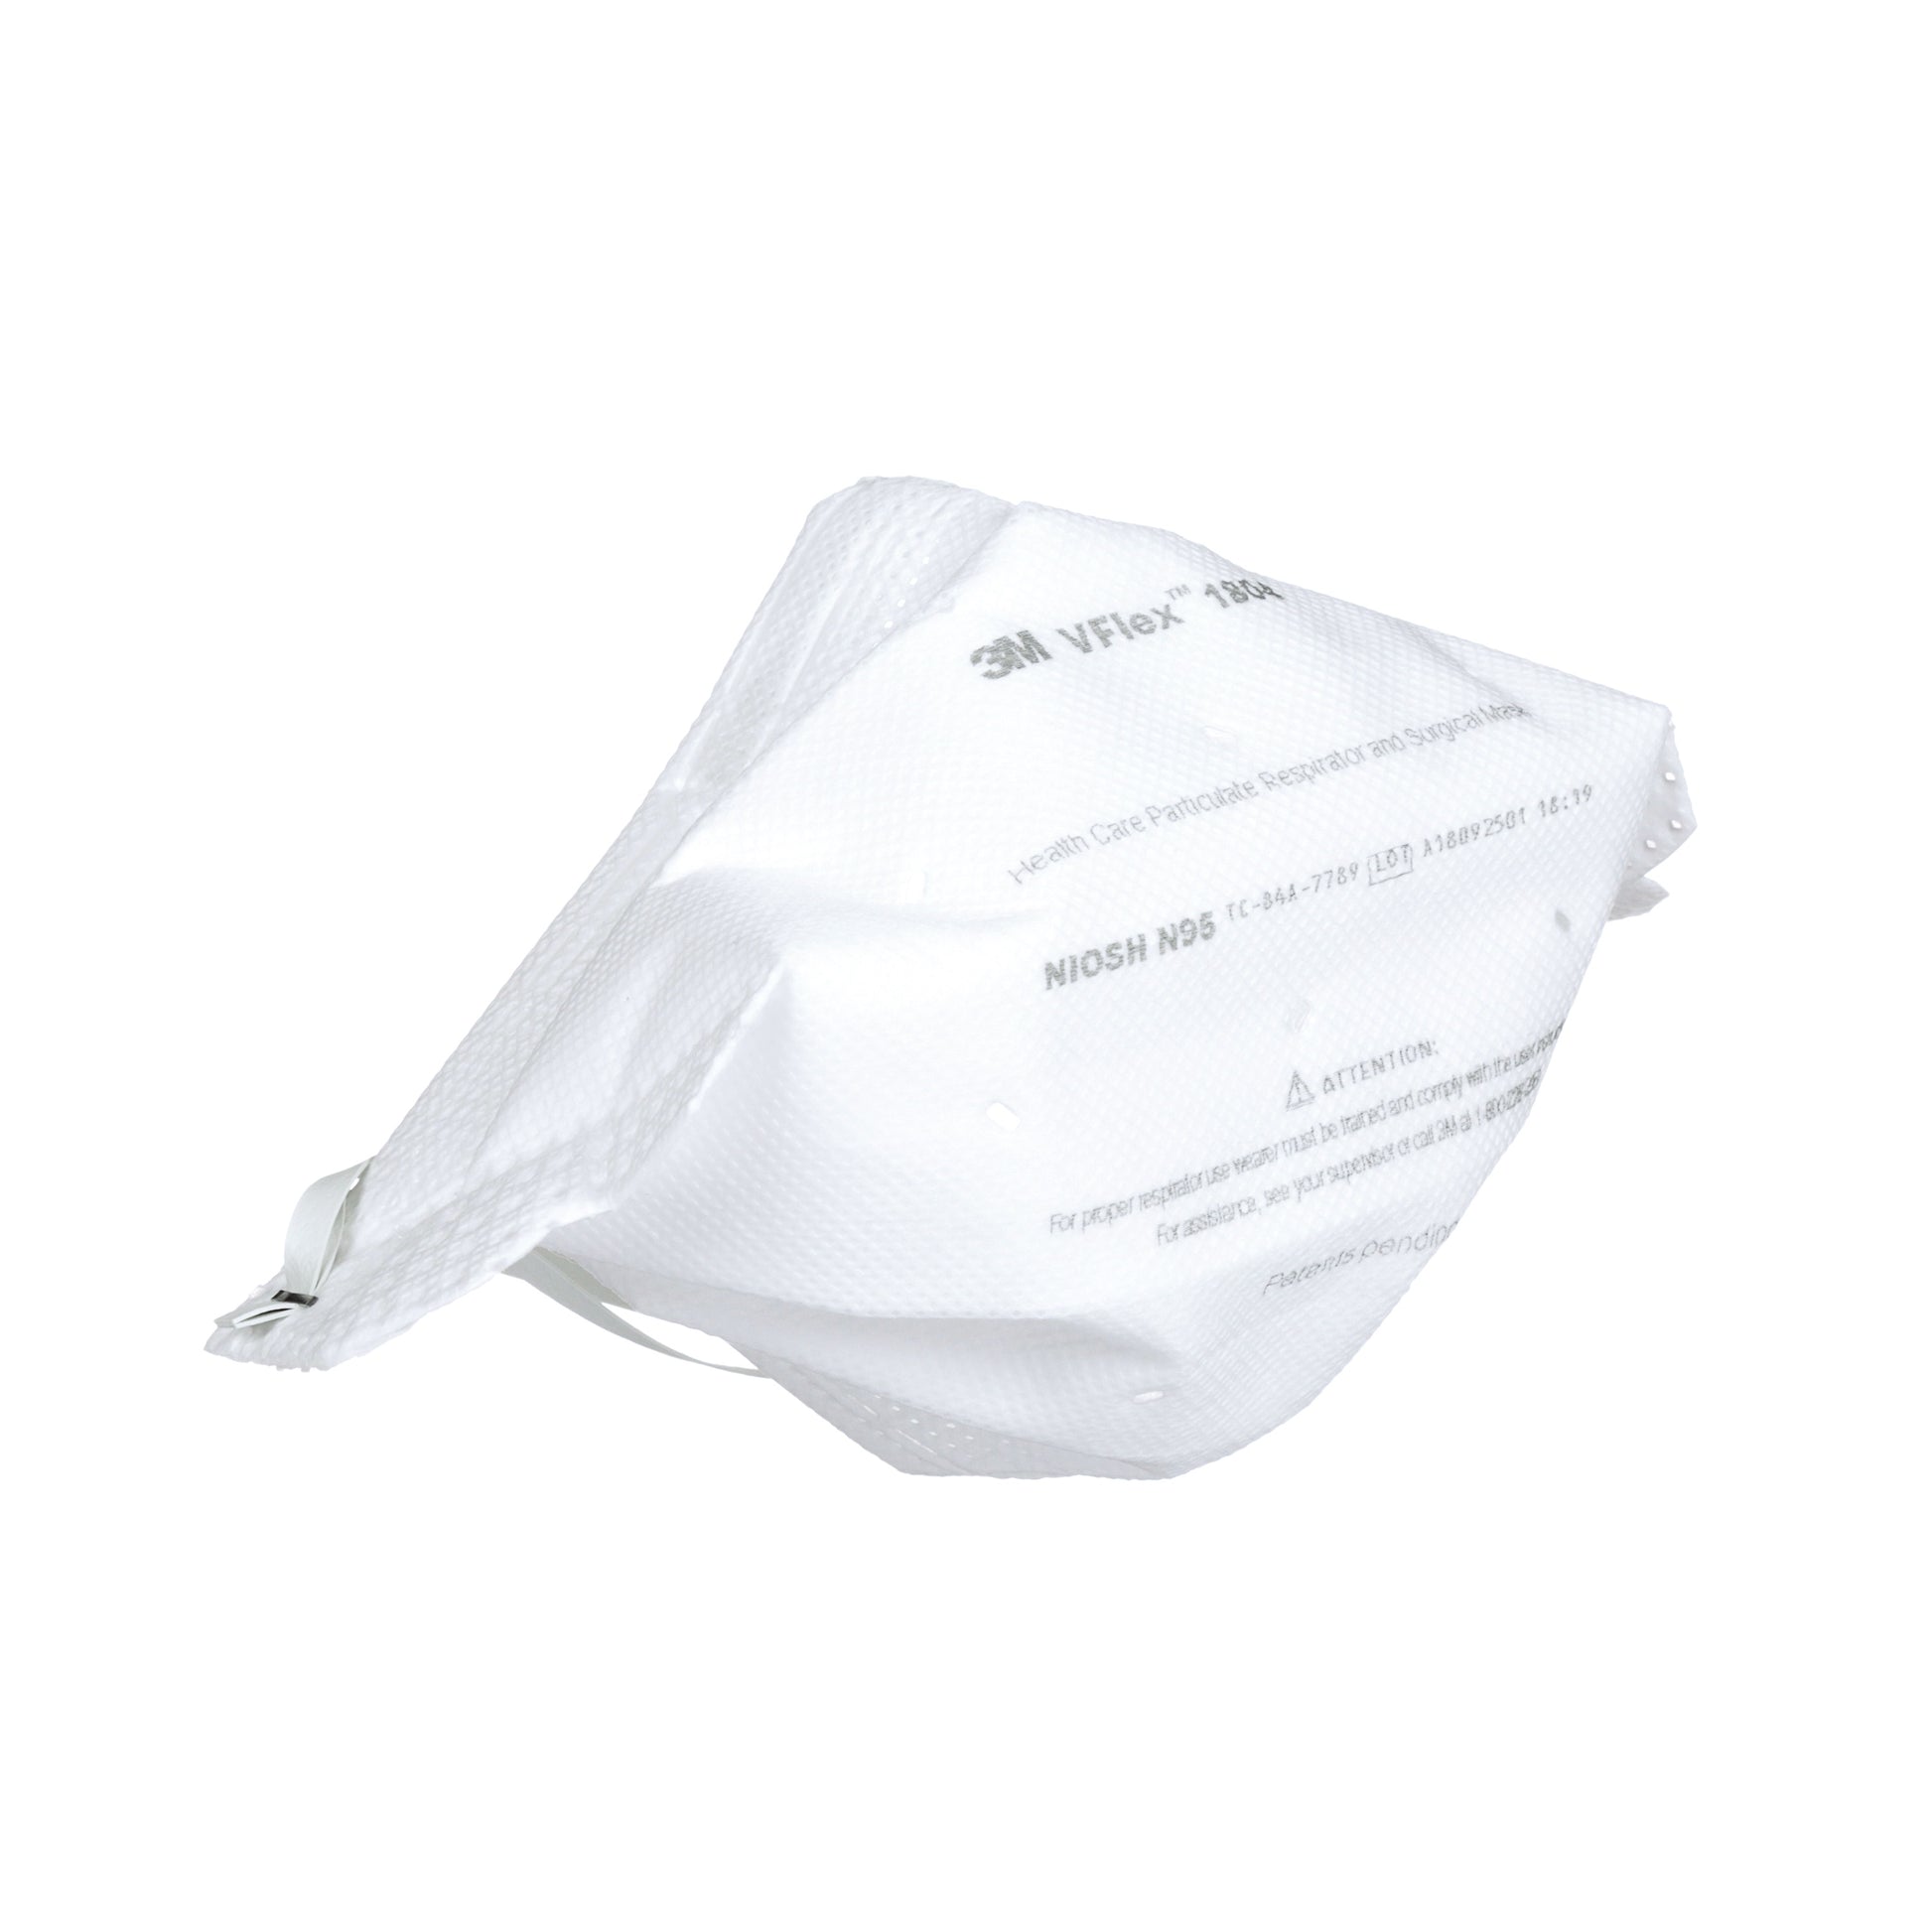 3M Canada Vflex 1804 Healthcare Surgical N95 respirator mask side view